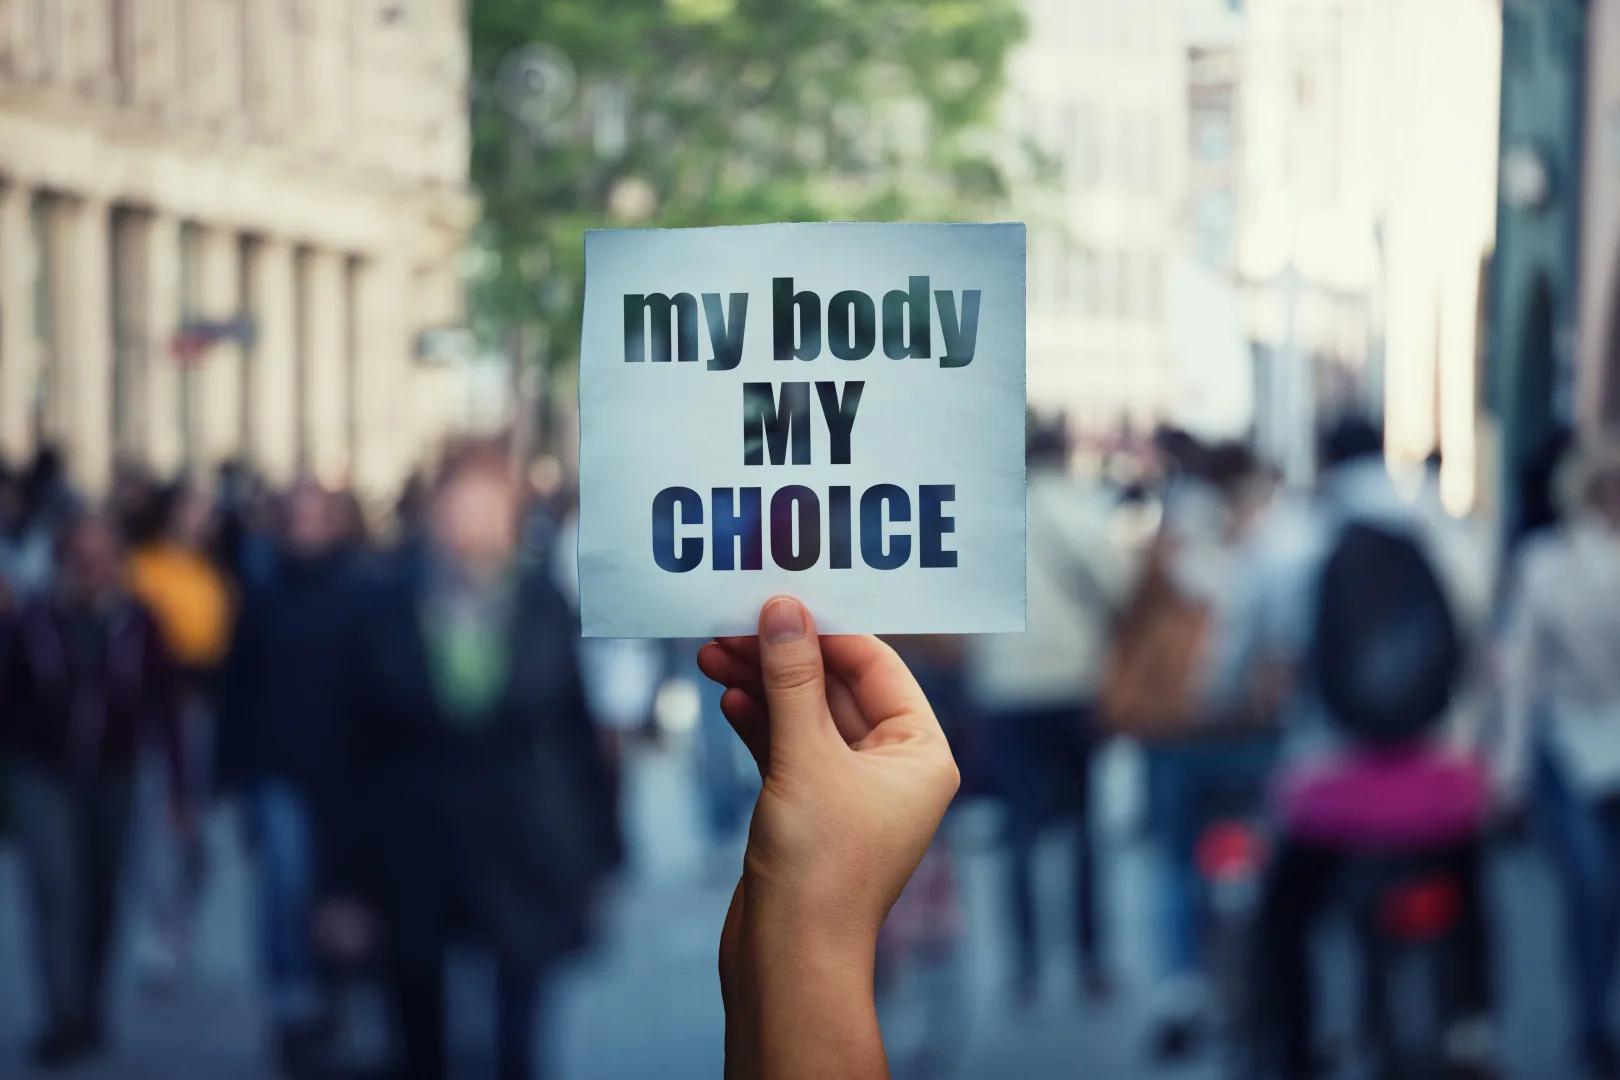 ‘Your body, my choice’: Abortion sympathizers confronted about mandates